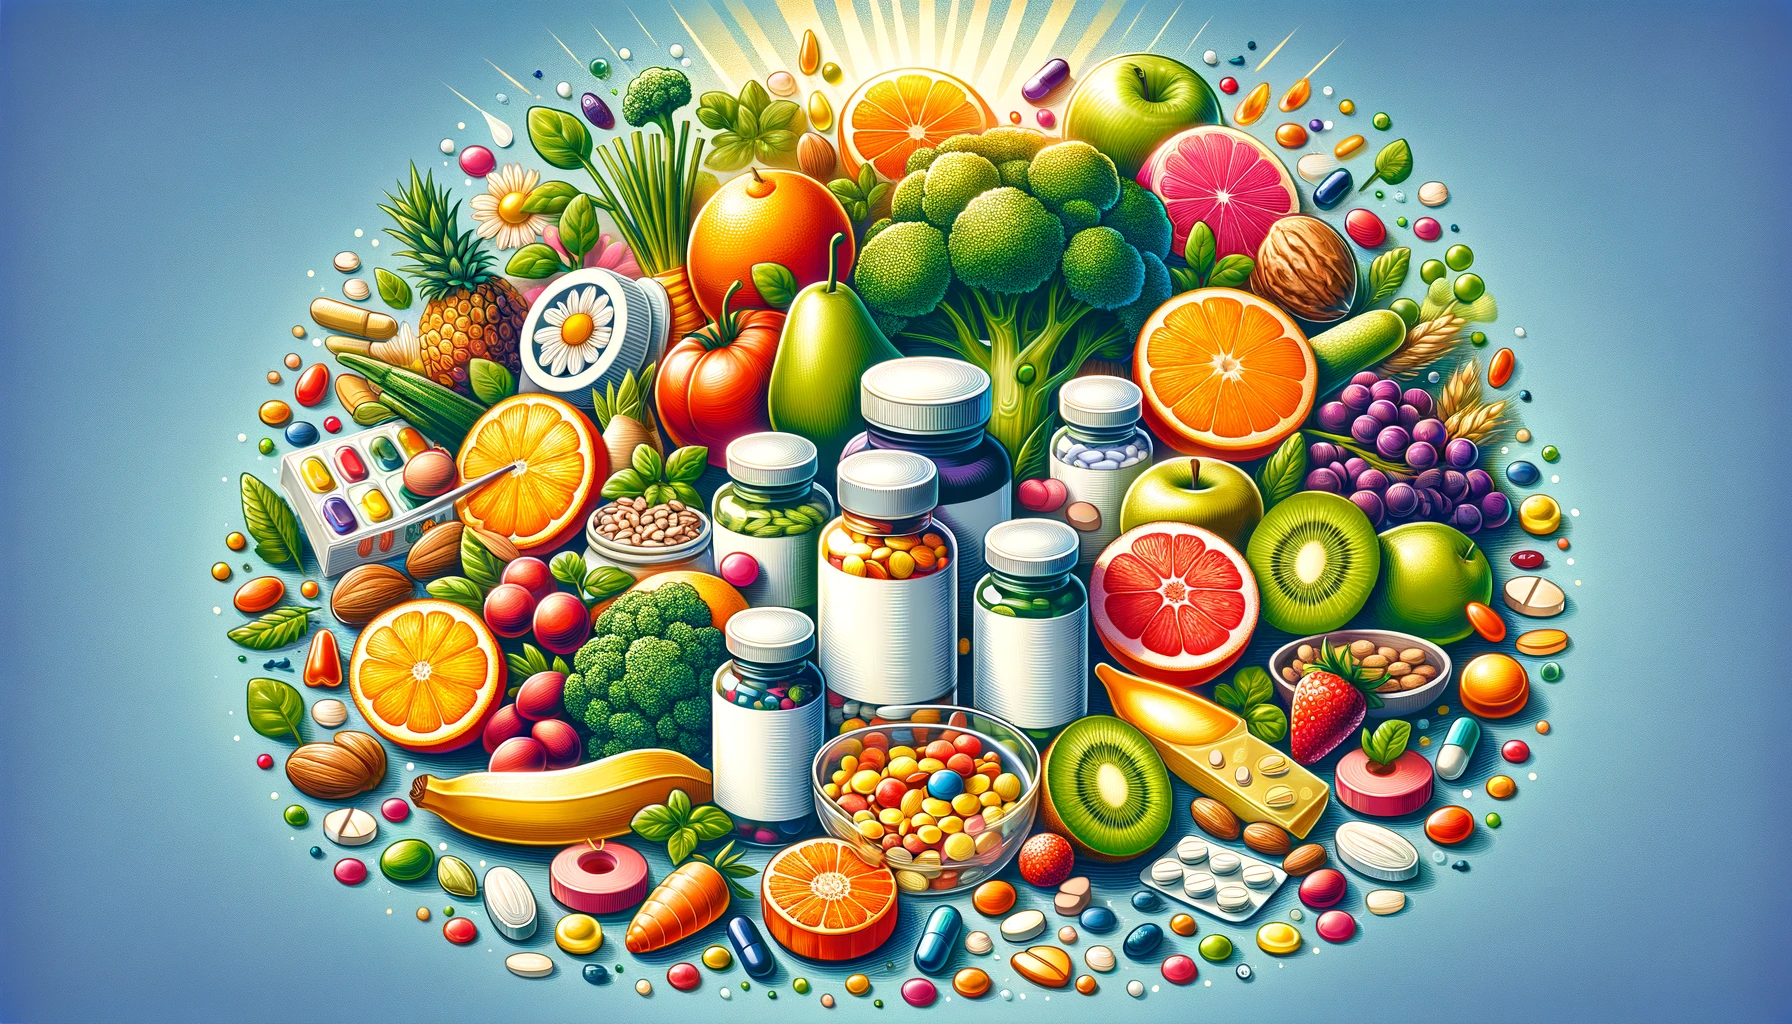 A visual guide to essential vitamins on HealthyLife NewStart, highlighting their health benefits.